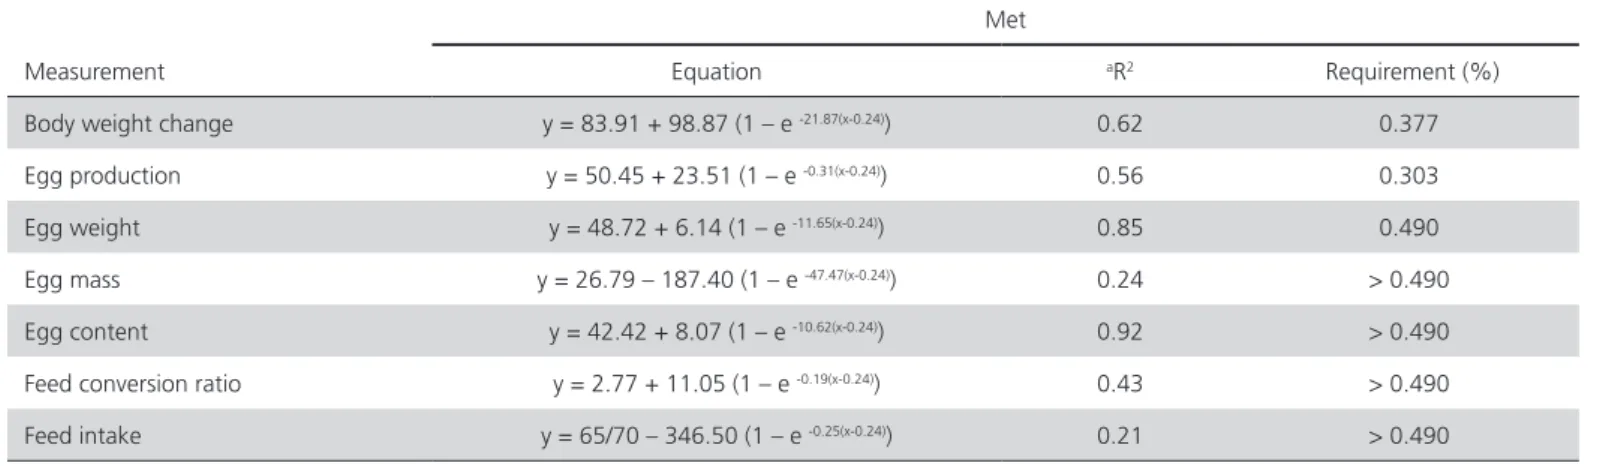 Table 2 – Exponential equations of Met requirements